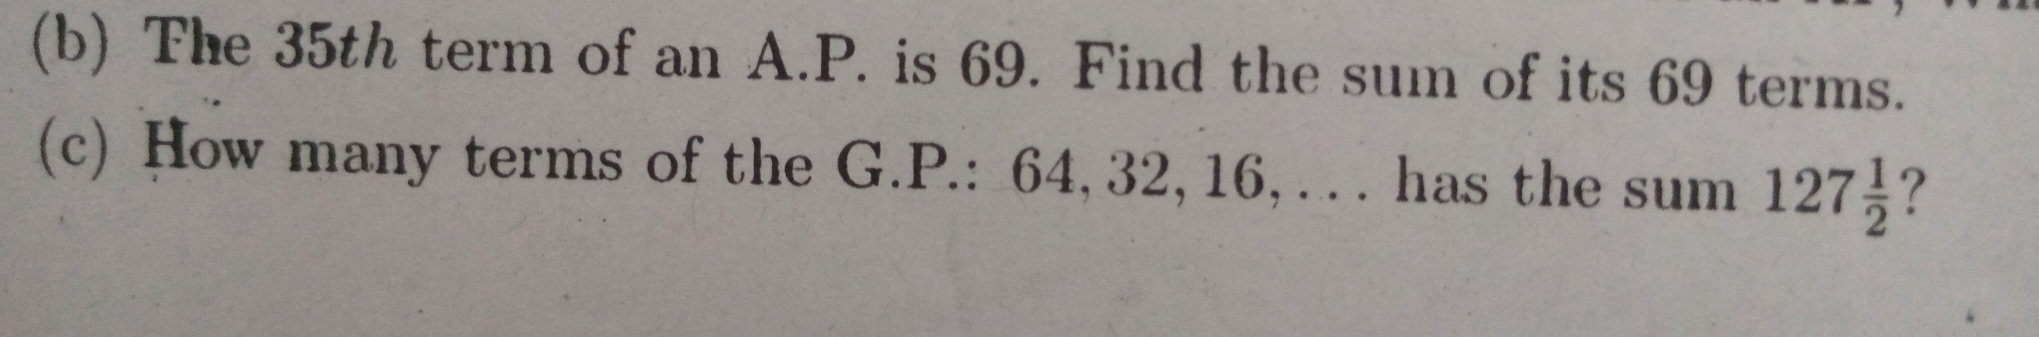 b The 35th term of an A.P. is 69. Find the sum of its 69 terms. c How many terms of the G.P.: 64, 32, 16, ... has the sum 127 1/2 ？